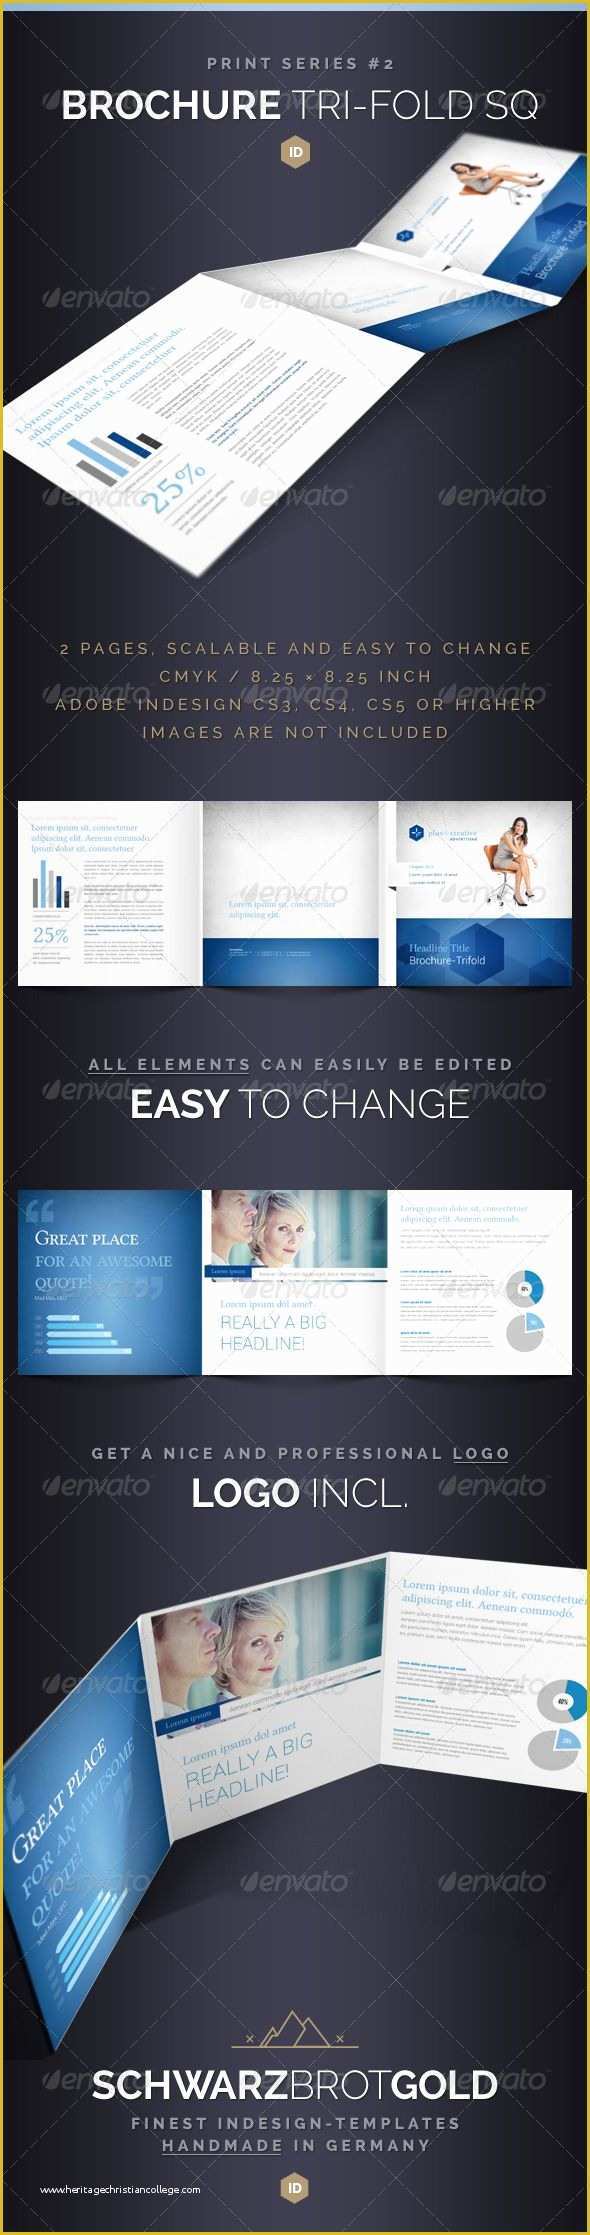 Multi Page Brochure Template Free Of 17 Best Images About Print Templates On Pinterest